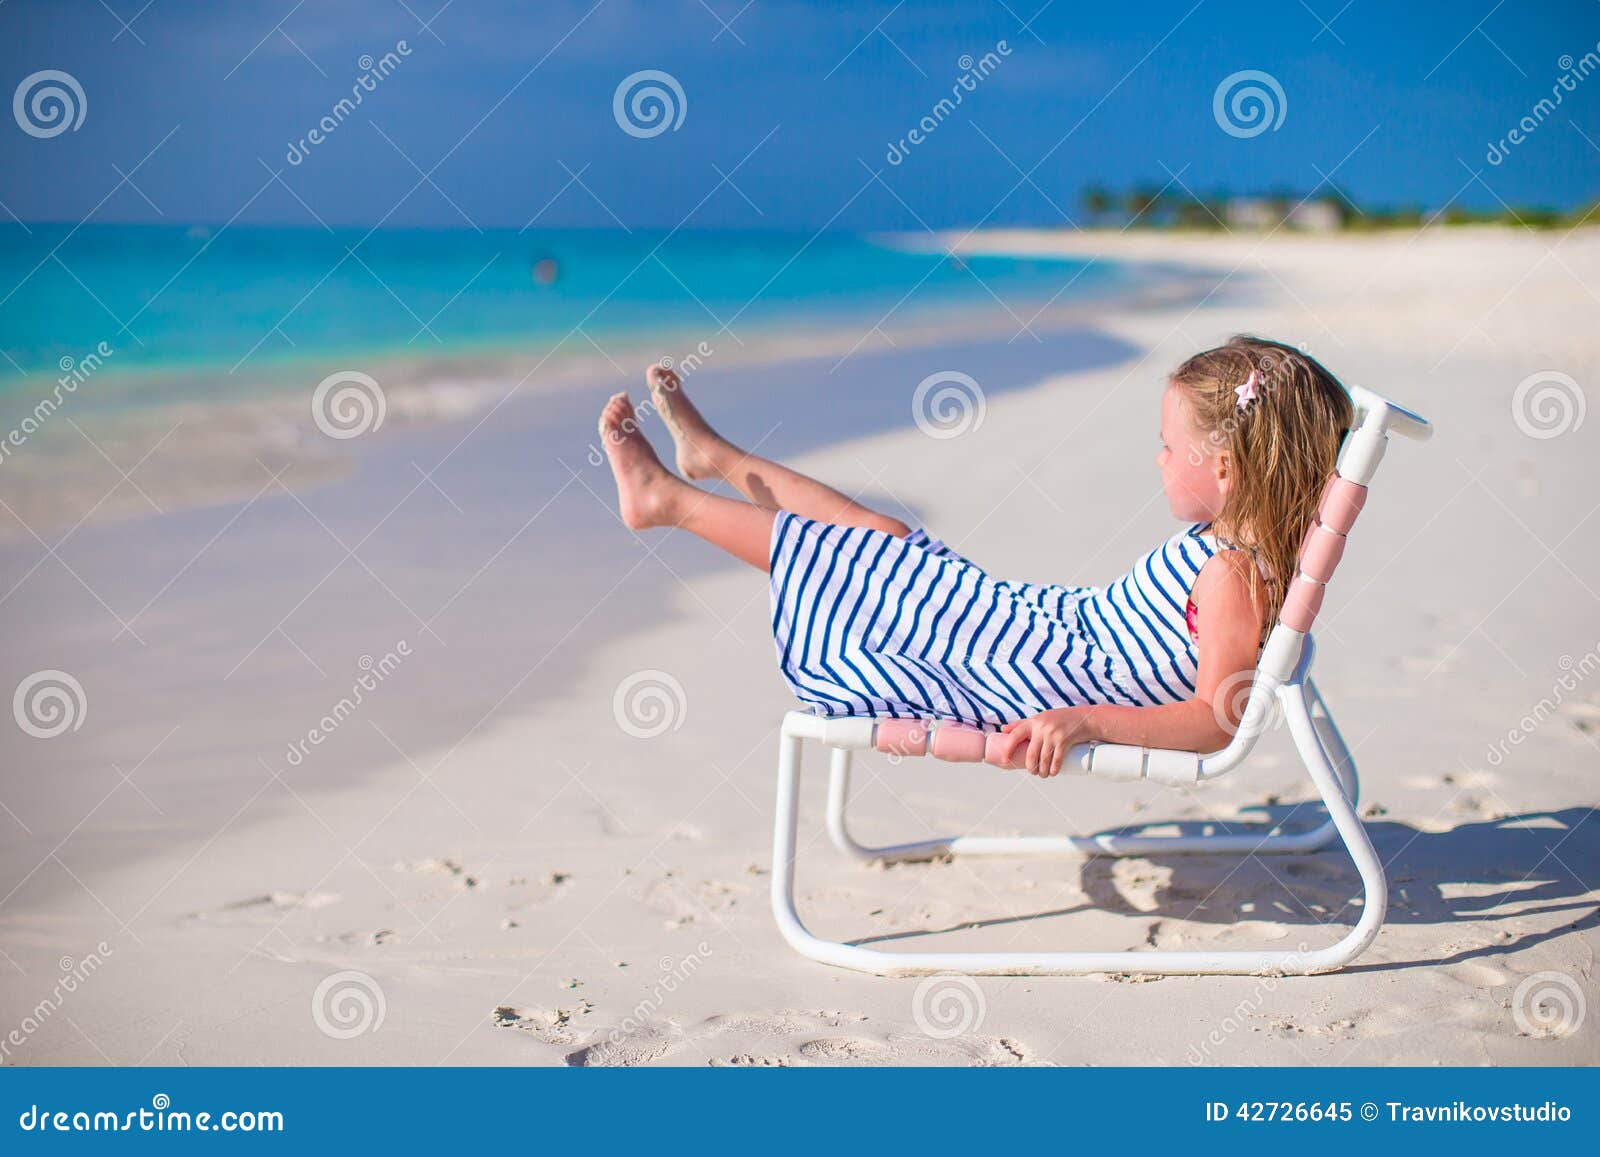 Adorable Little Girl On Beach Chair During Summer Stock Image